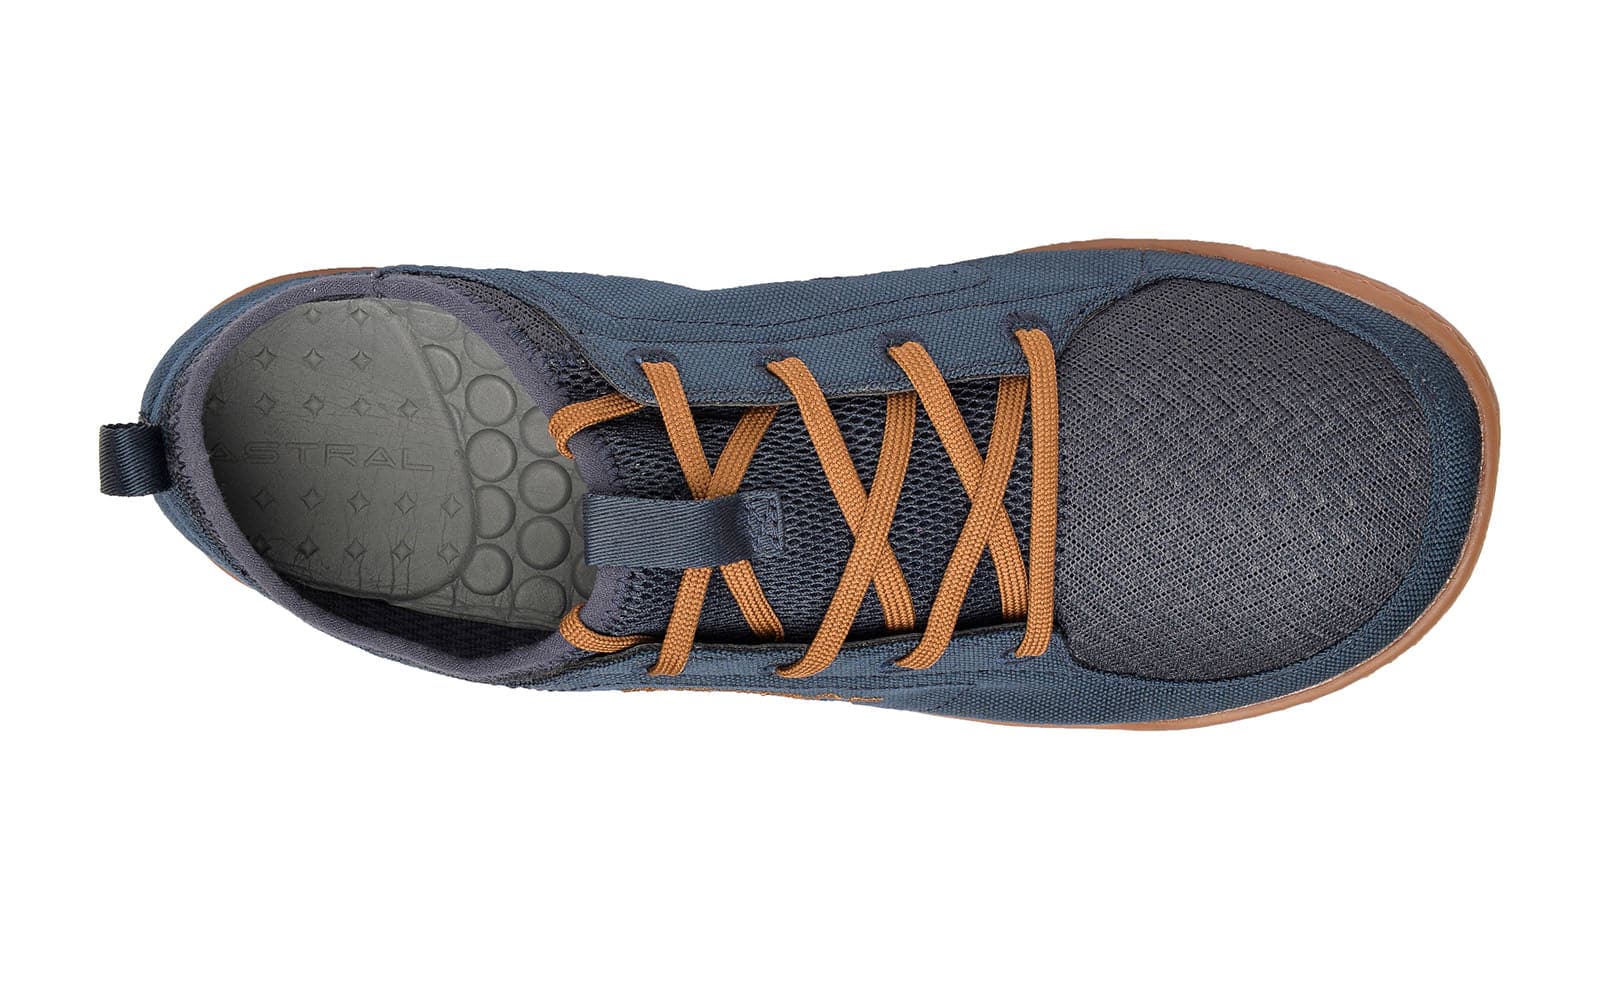 Featuring the Loyak - Men's men's footwear manufactured by Astral shown here from a twelfth angle.